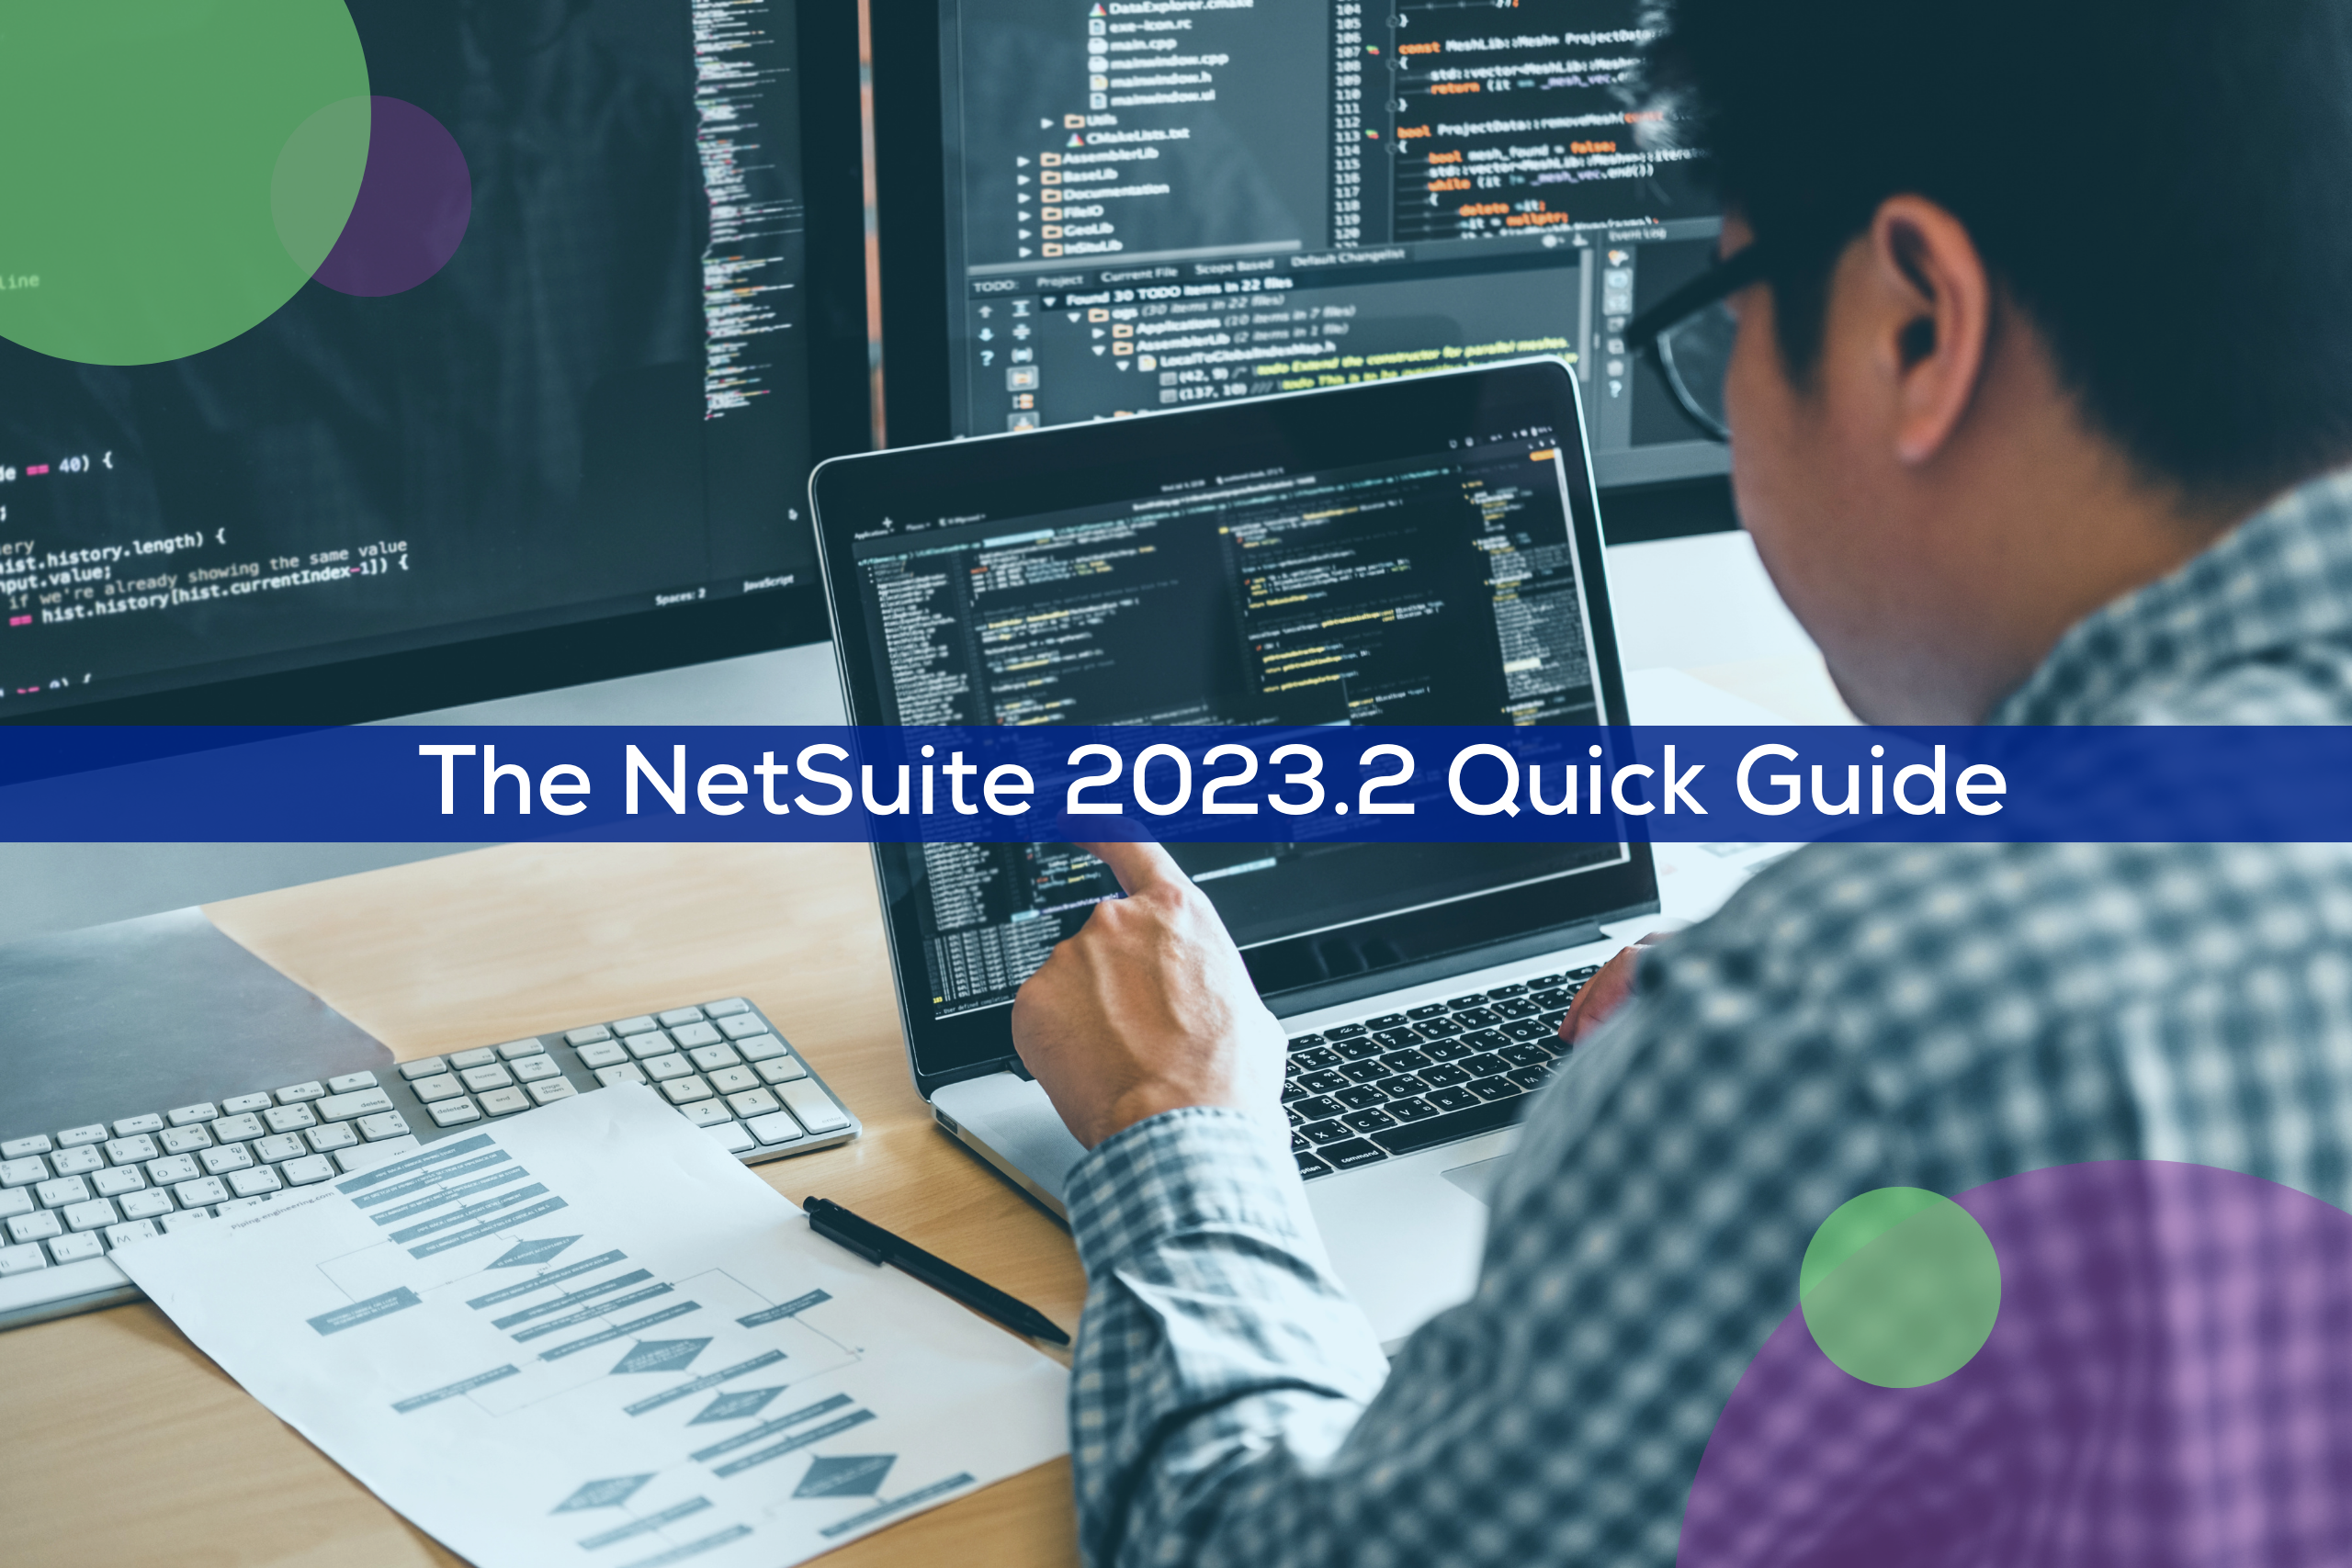 The NetSuite 2023.2 Quick Guide